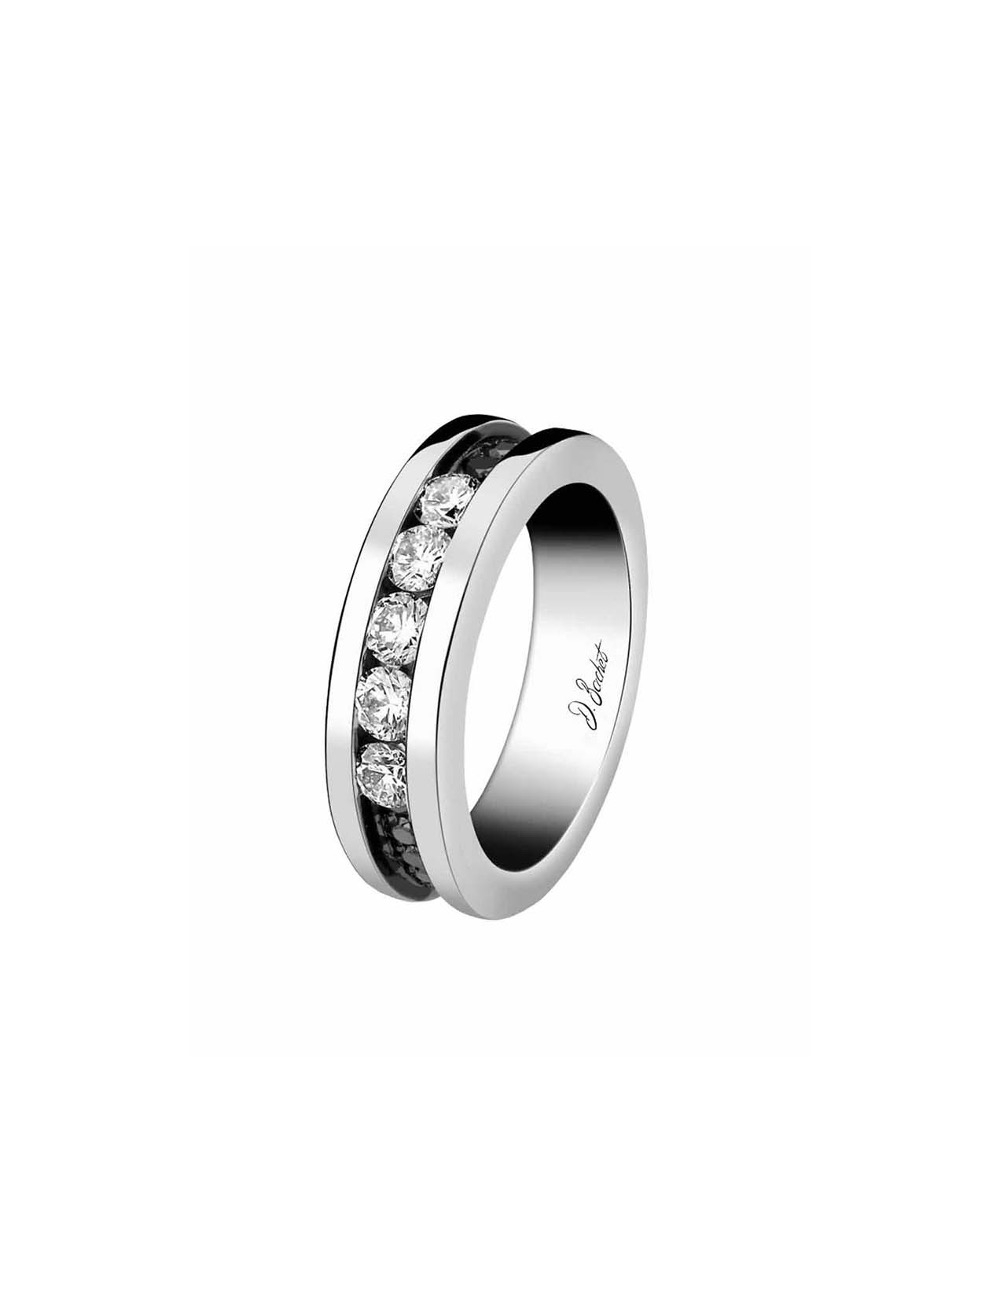 Platinum 'Light in Paris' ring with white and black diamonds, embodying modern elegance in a 5 mm band.